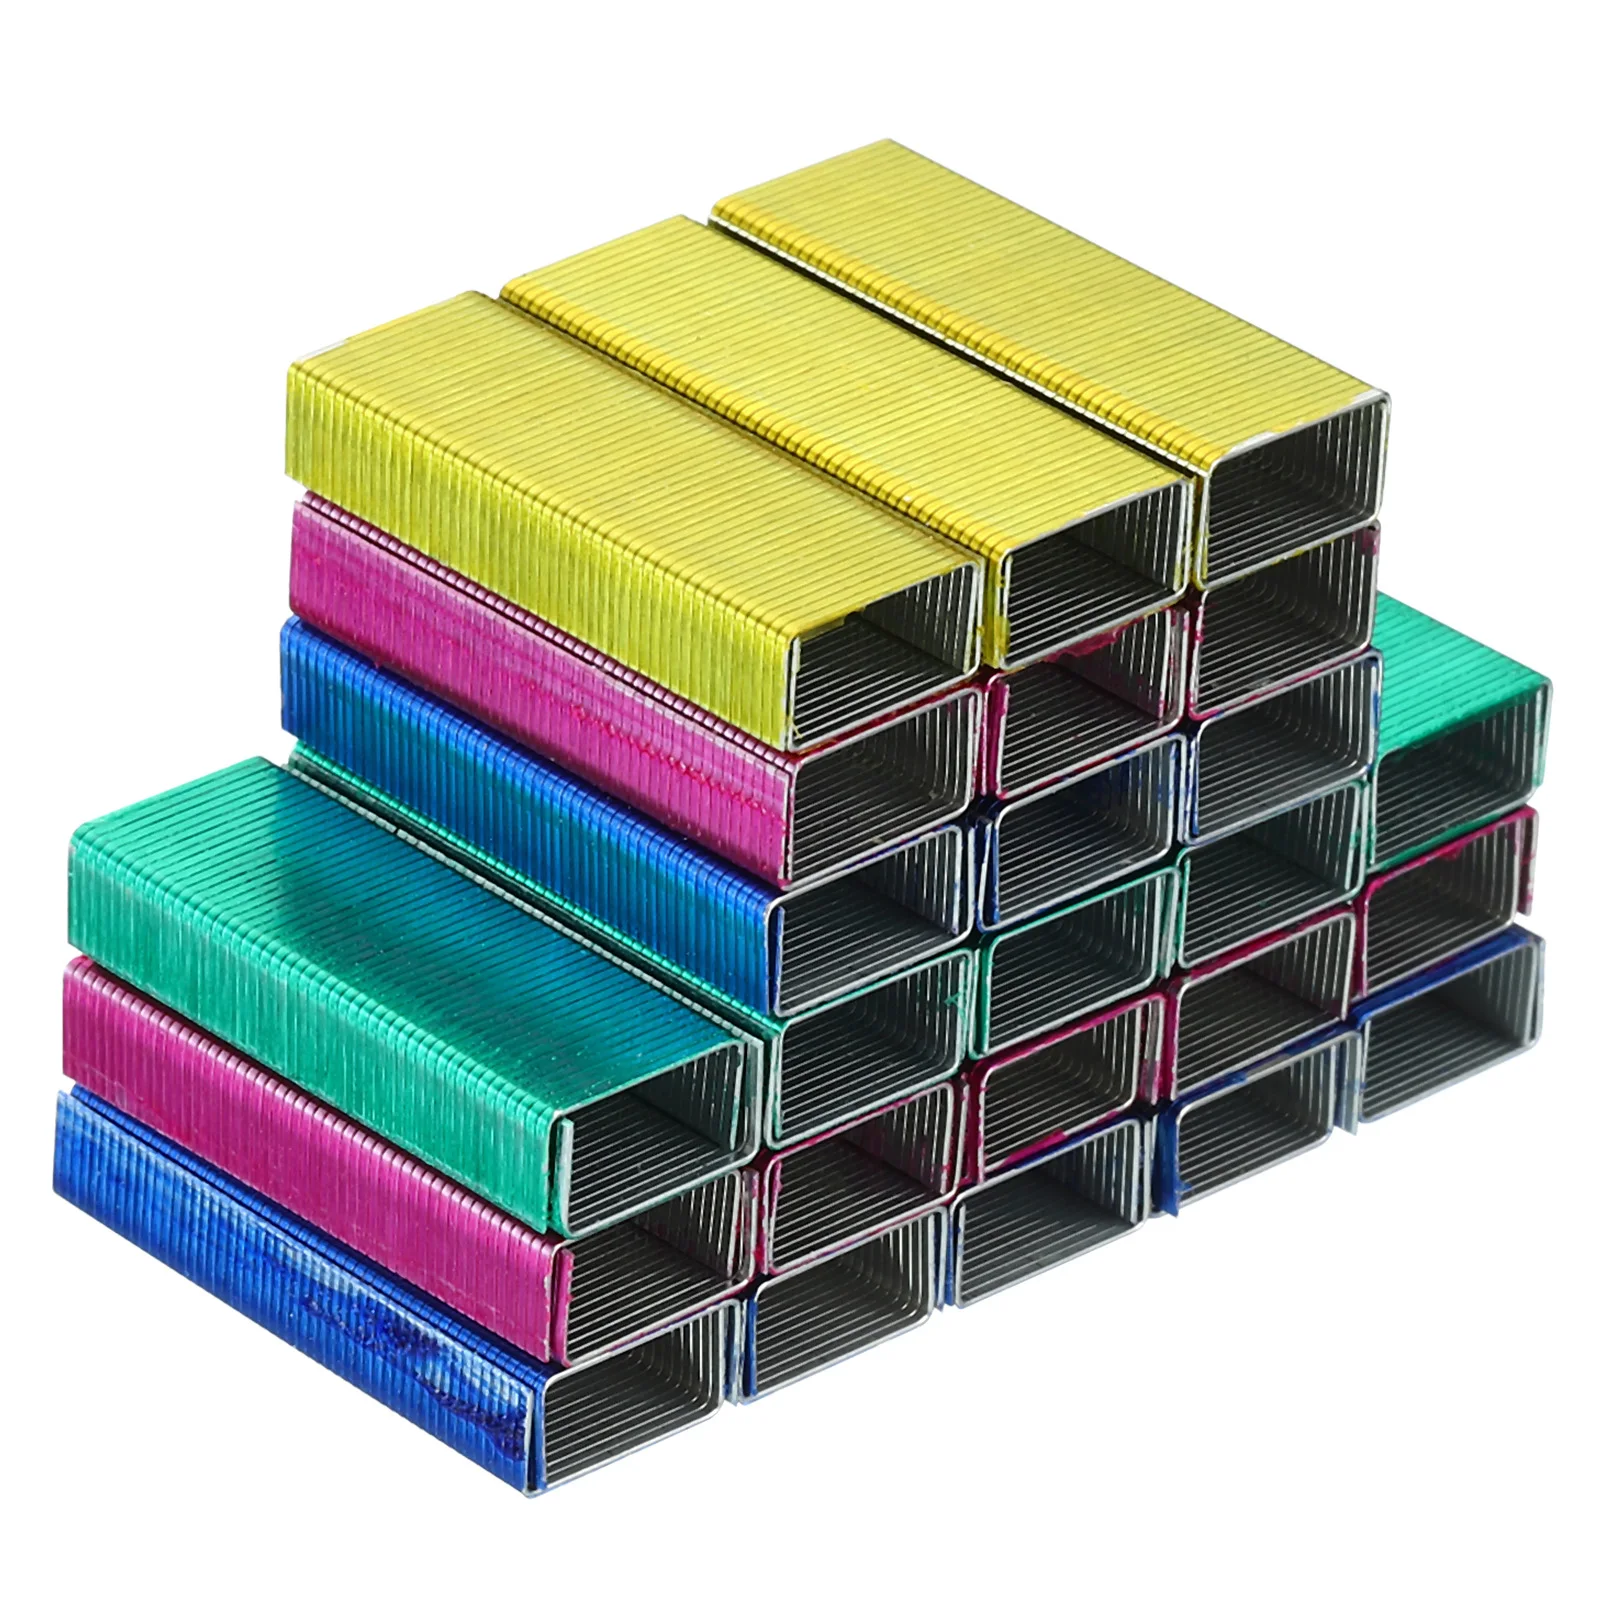 

4000Pcs/4Pack Creative Colorful Metal Staples Office Stationery Staple No.10 Binding Supplies Normal Staples Office Accessories